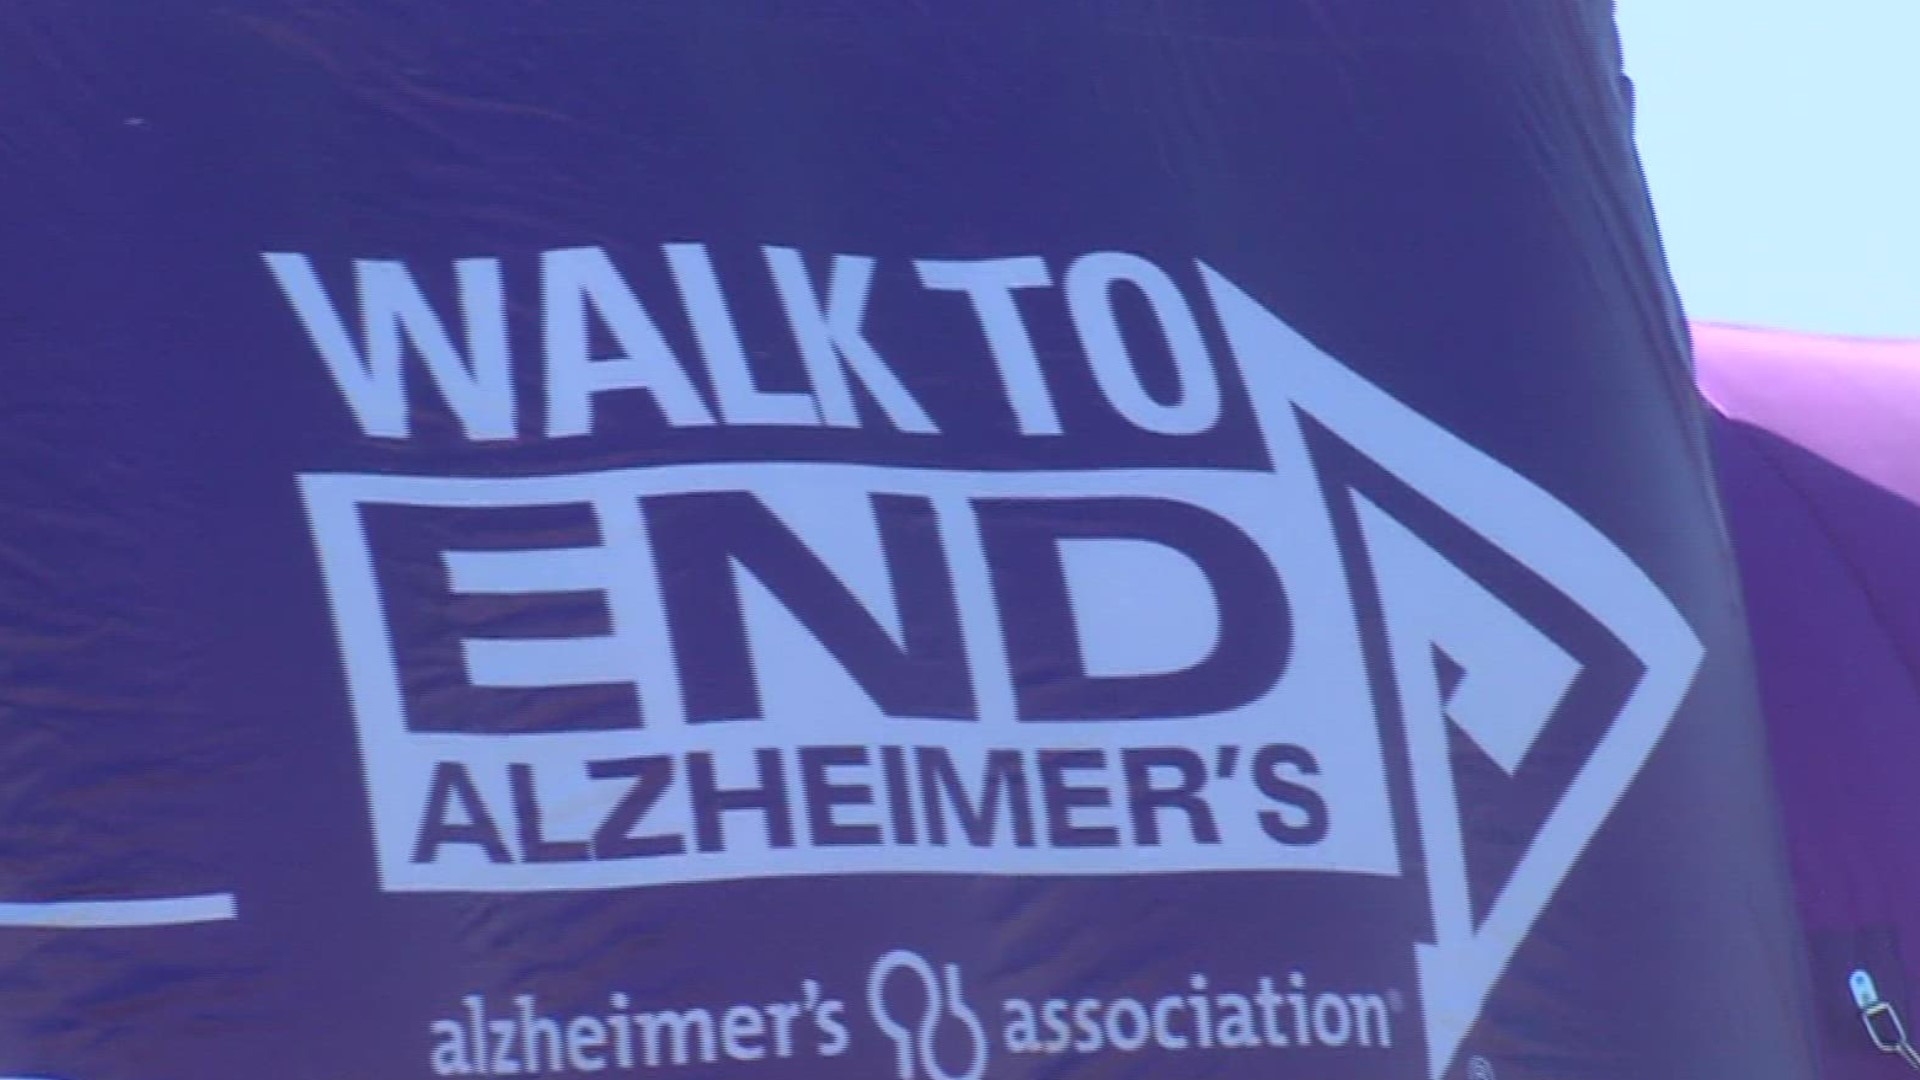 Event organizers stress how much Alzheimer's and dementia affect Americans on a daily basis.